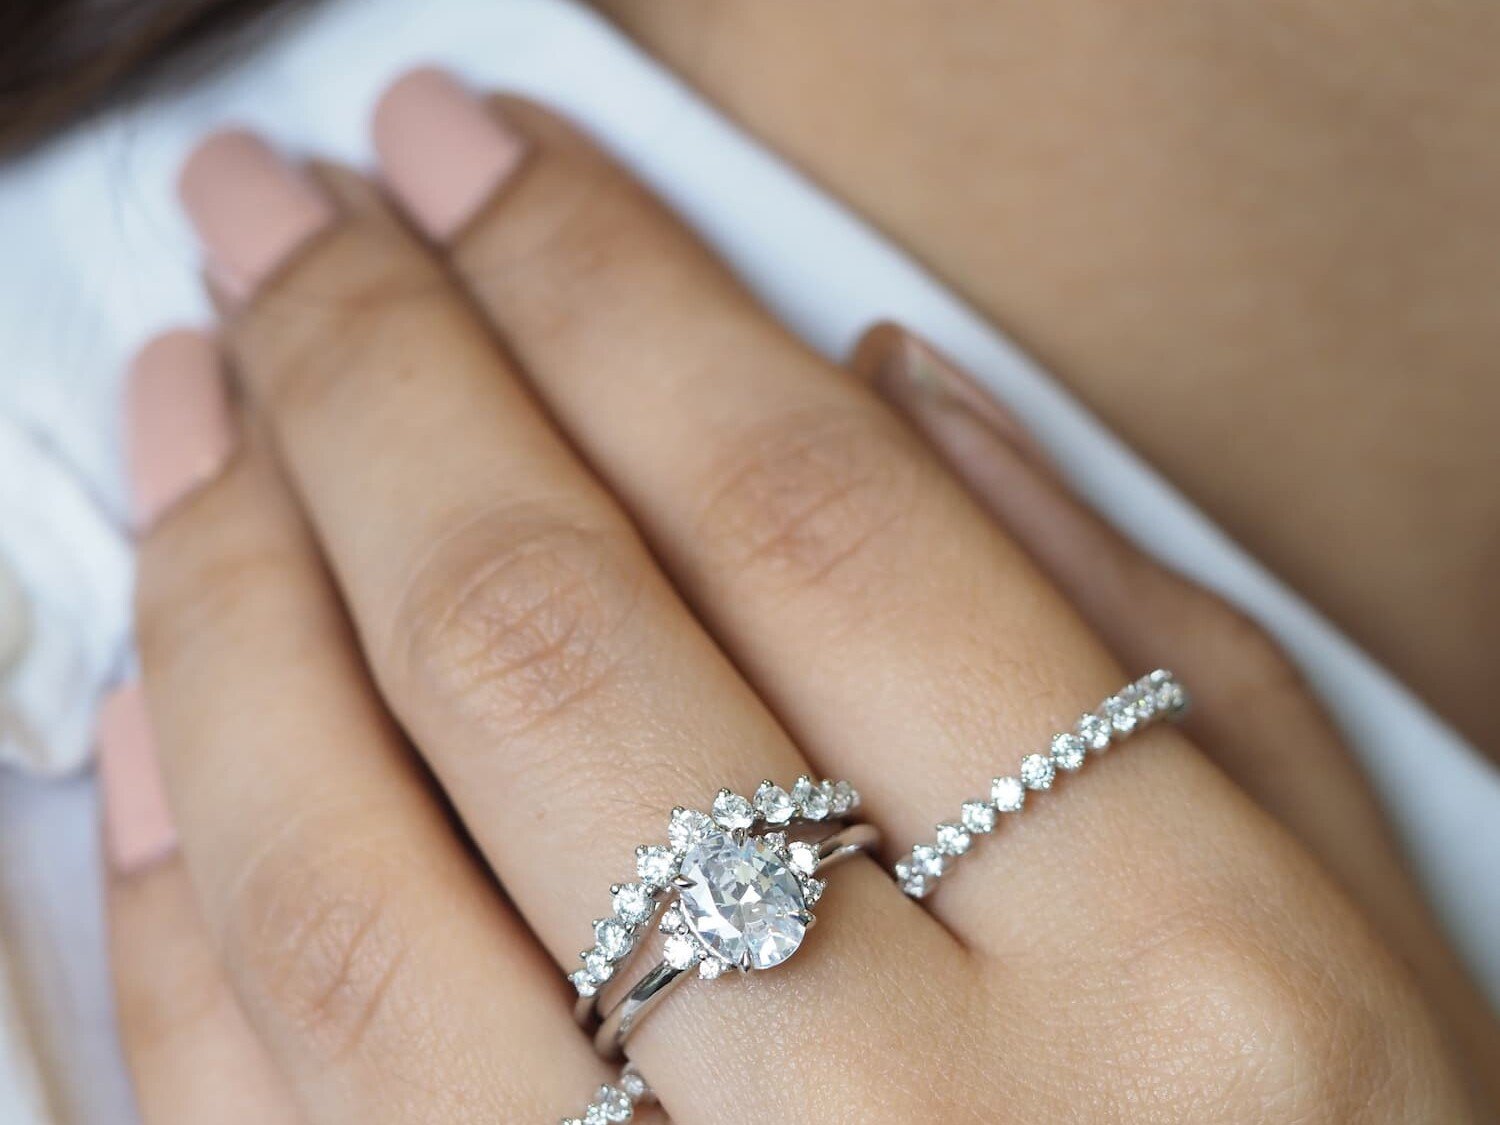 Sophia Diamond Engagement RIng with stackable rings